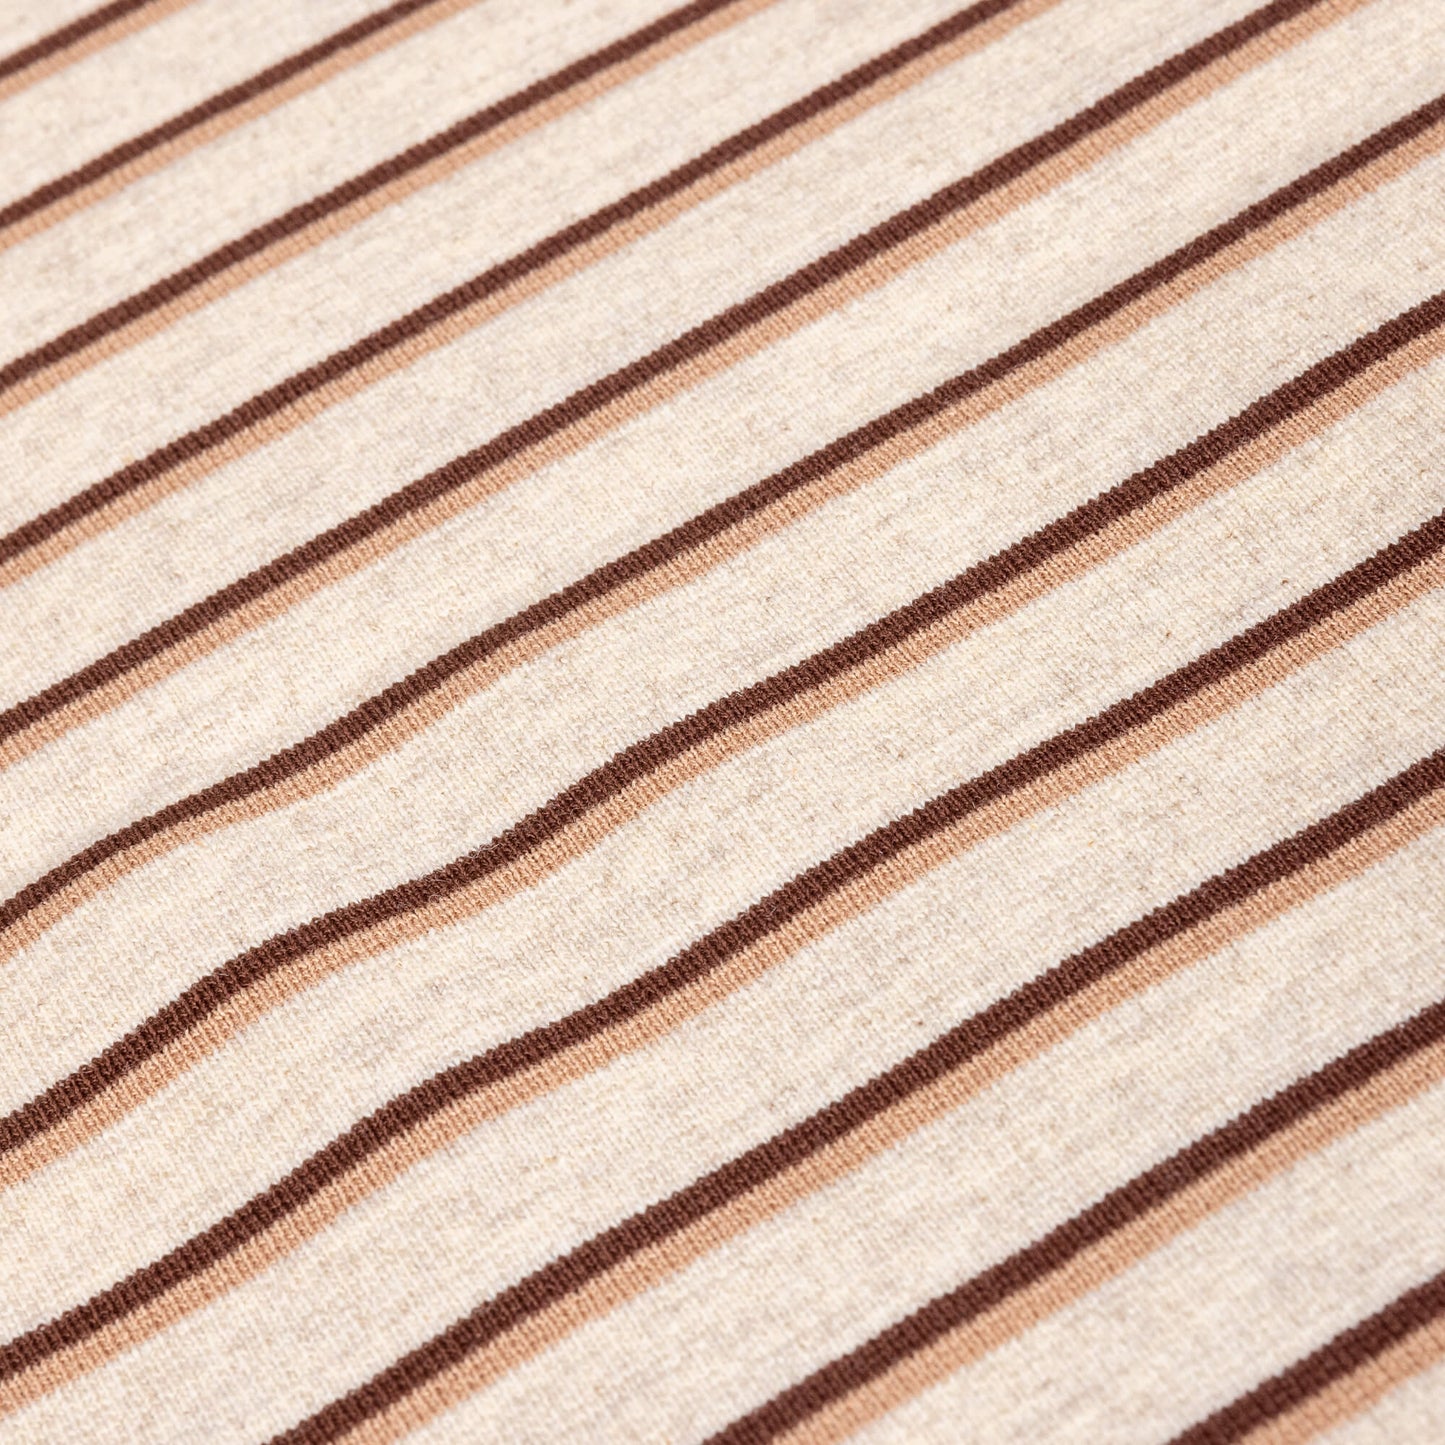 A close up of Ecru, brown and beige striped  soft t-shirt material in a jersey fabric for making clothing or crafting projects.